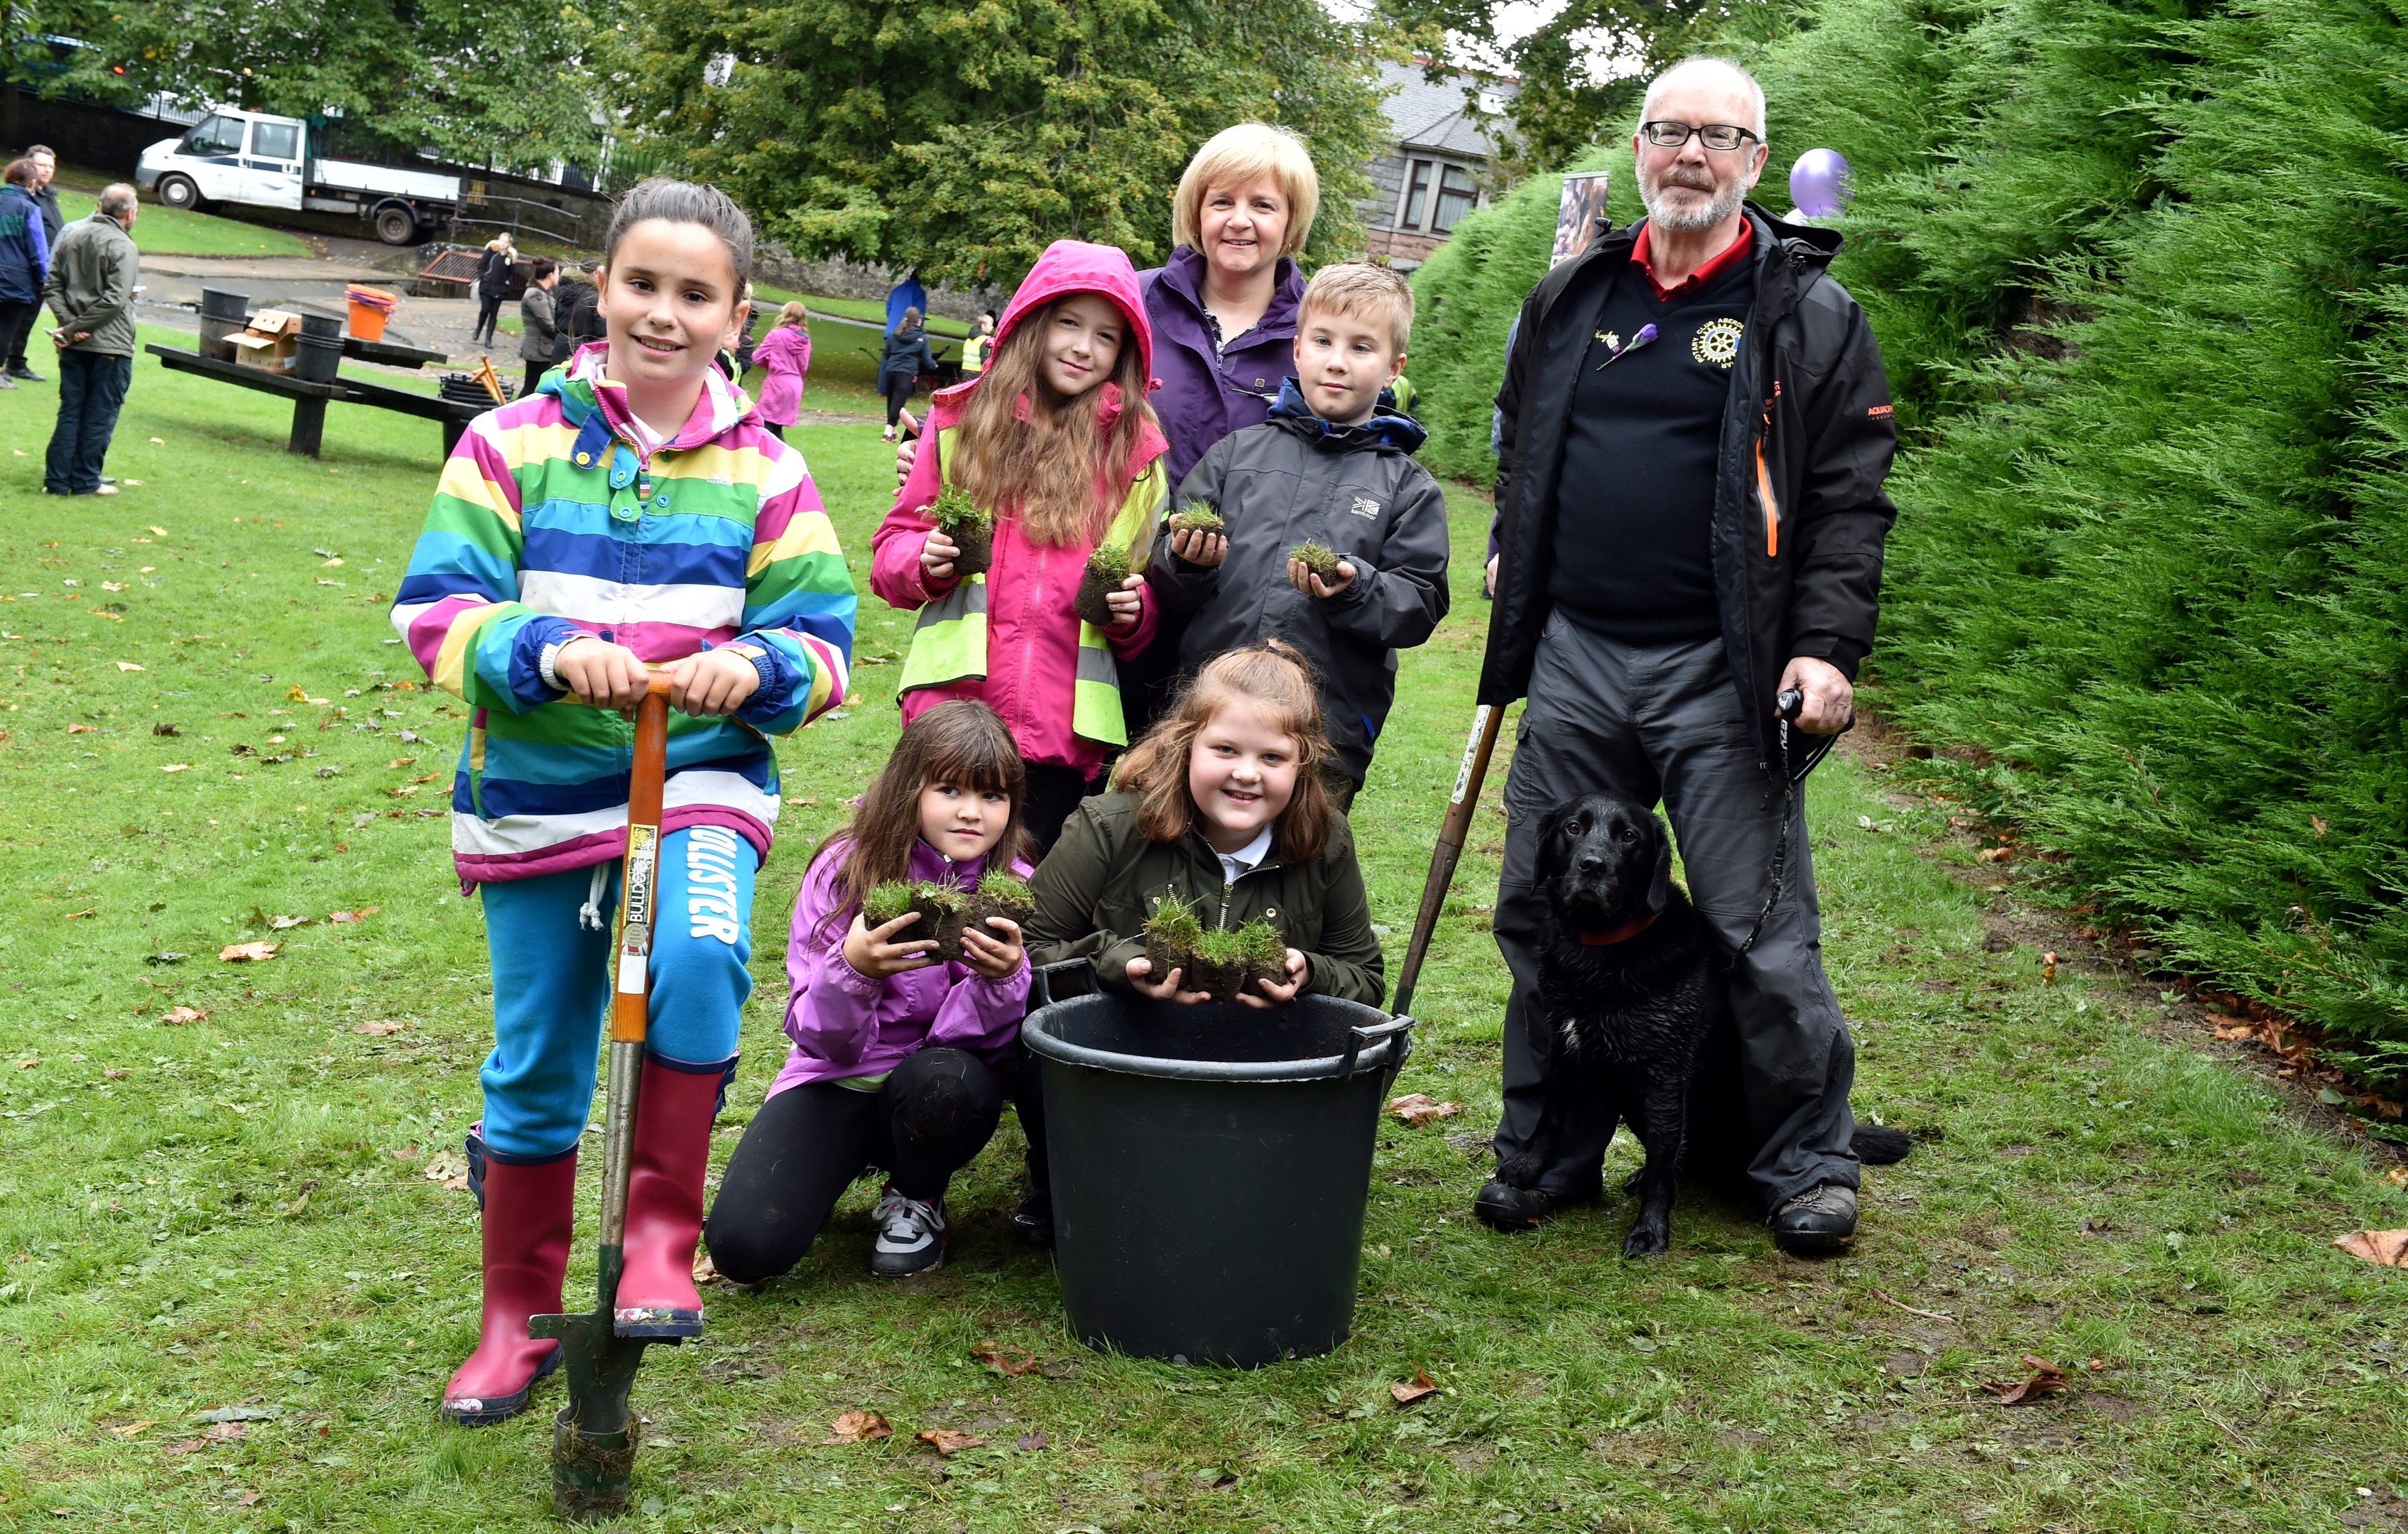 Pictured: Cornhill Primary School pupils L-R front - Gemma Still, Summer Flett, Abbie Shepherd back - Erin Buchan and Marshall Meikle, who helped plant the bulbs with Council leadert Jenny Laing and Rotary Vice President Bob Hughes with his dog Jess.